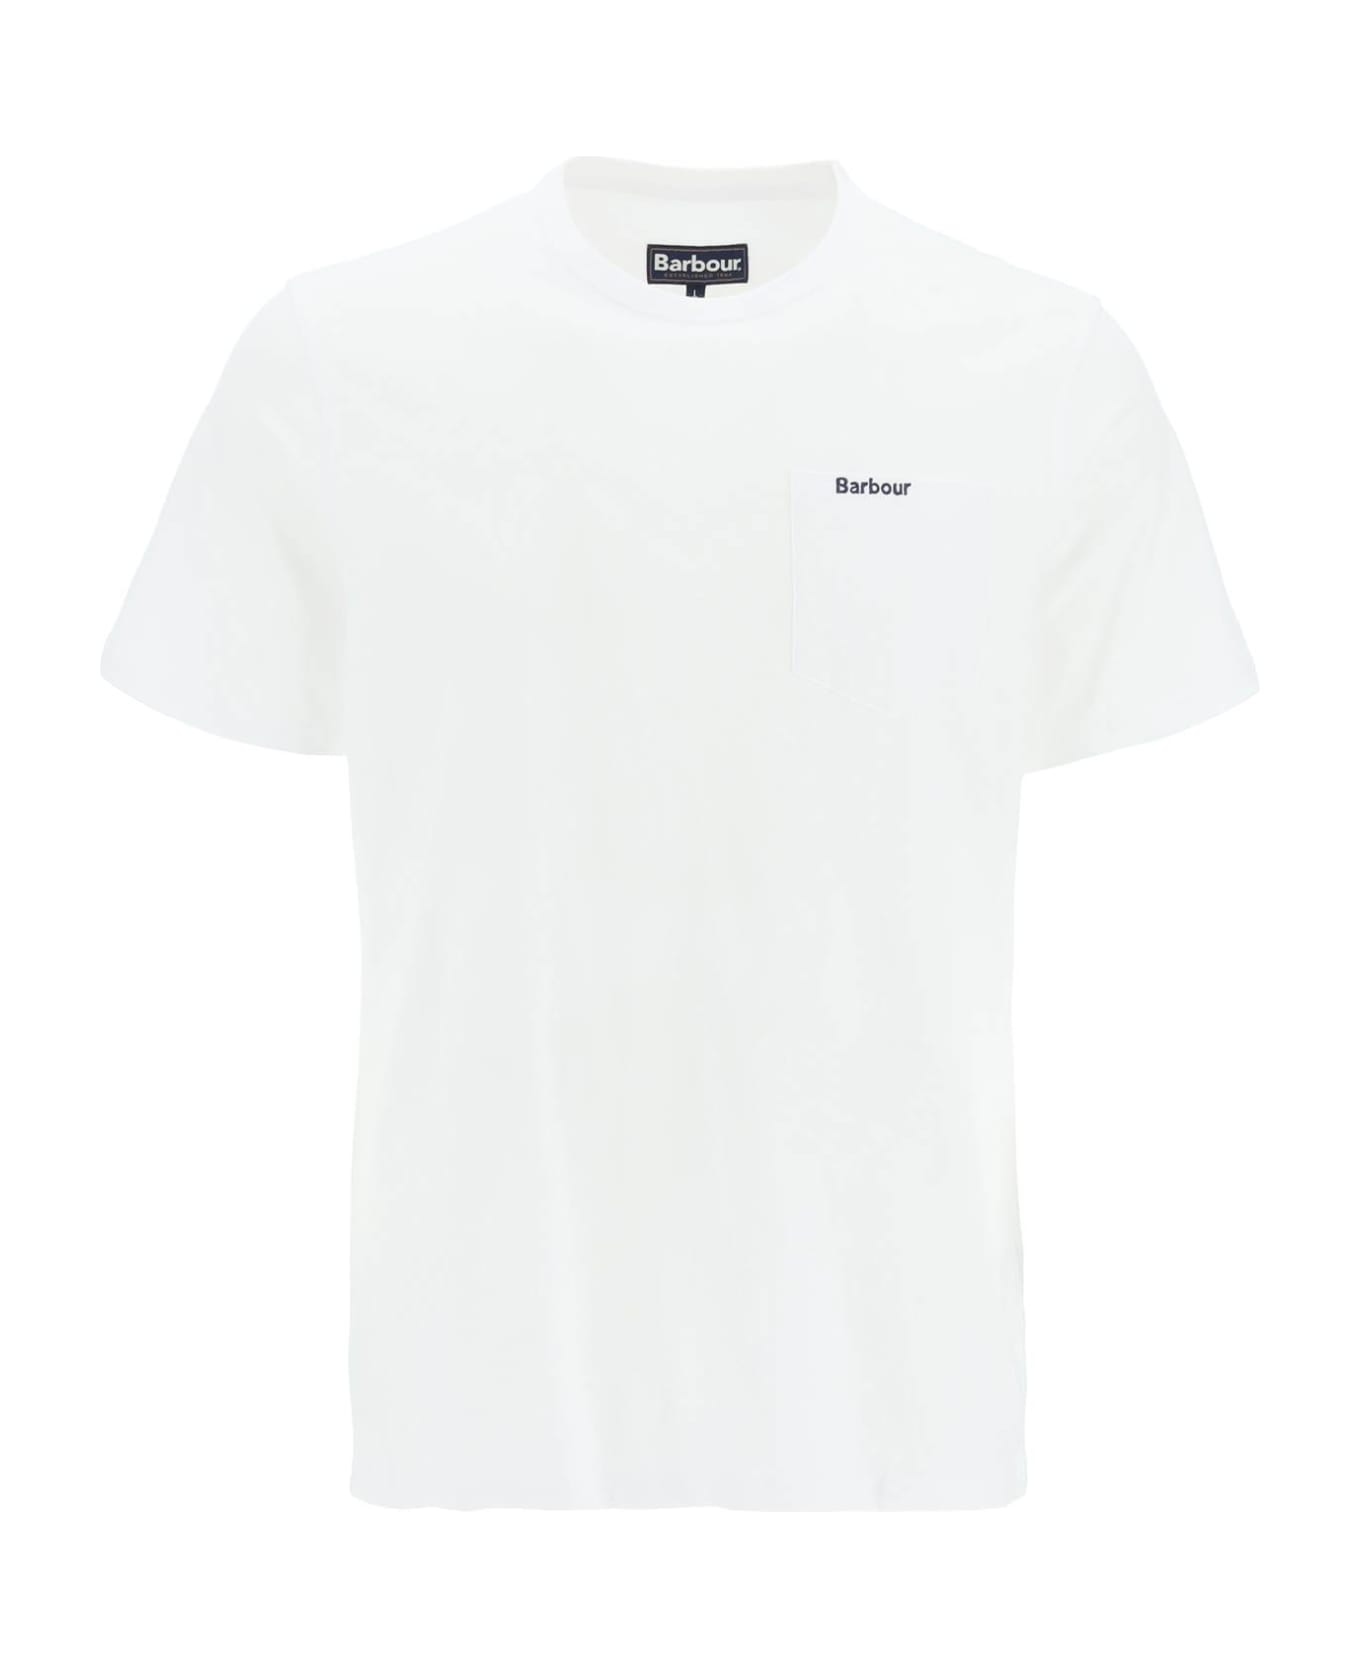 Barbour Classic Chest Pocket T-shirt - WHITE